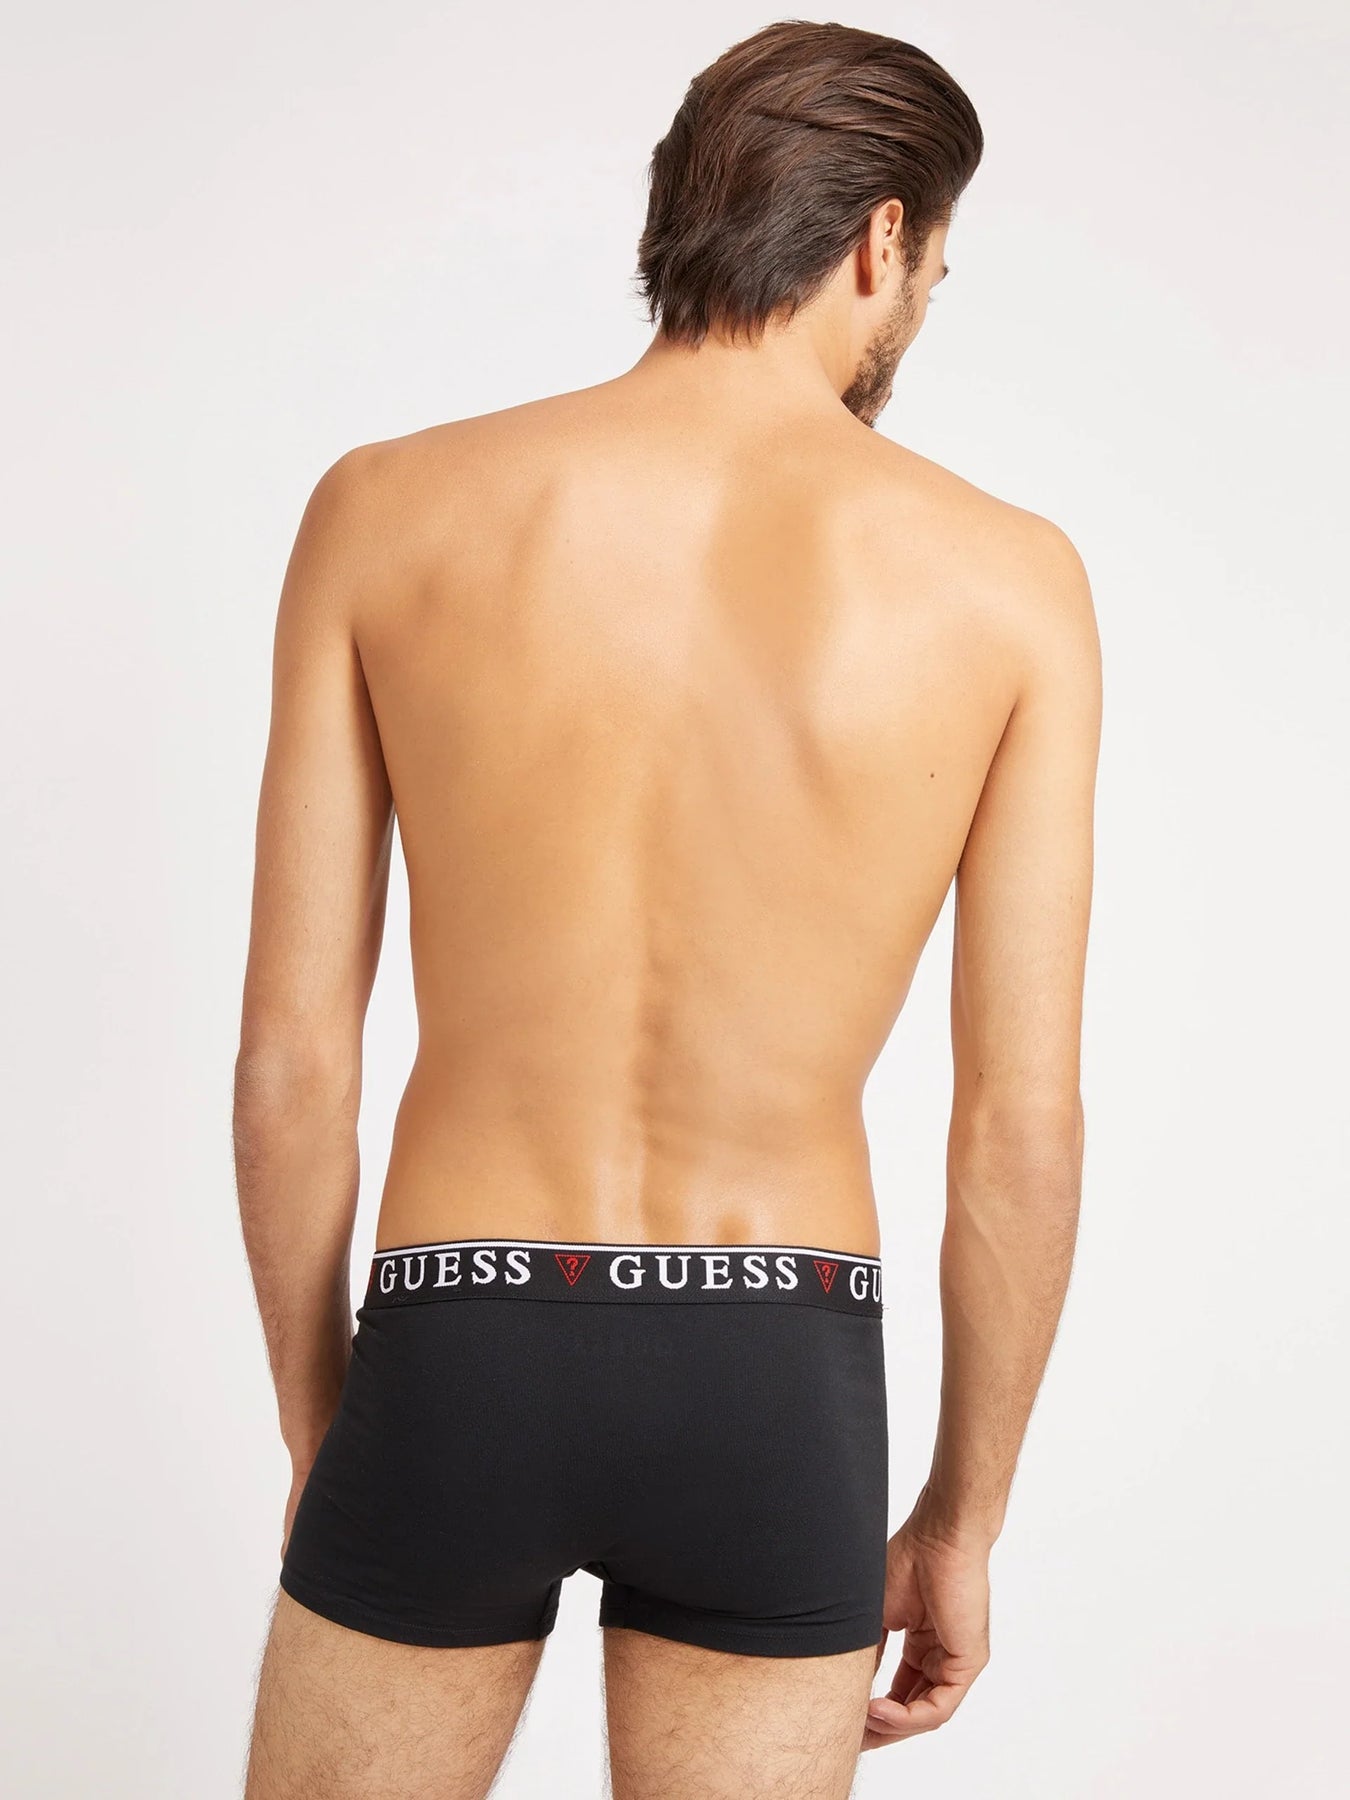 IDOL BOXER TRUNK 3 PACK – GUESS